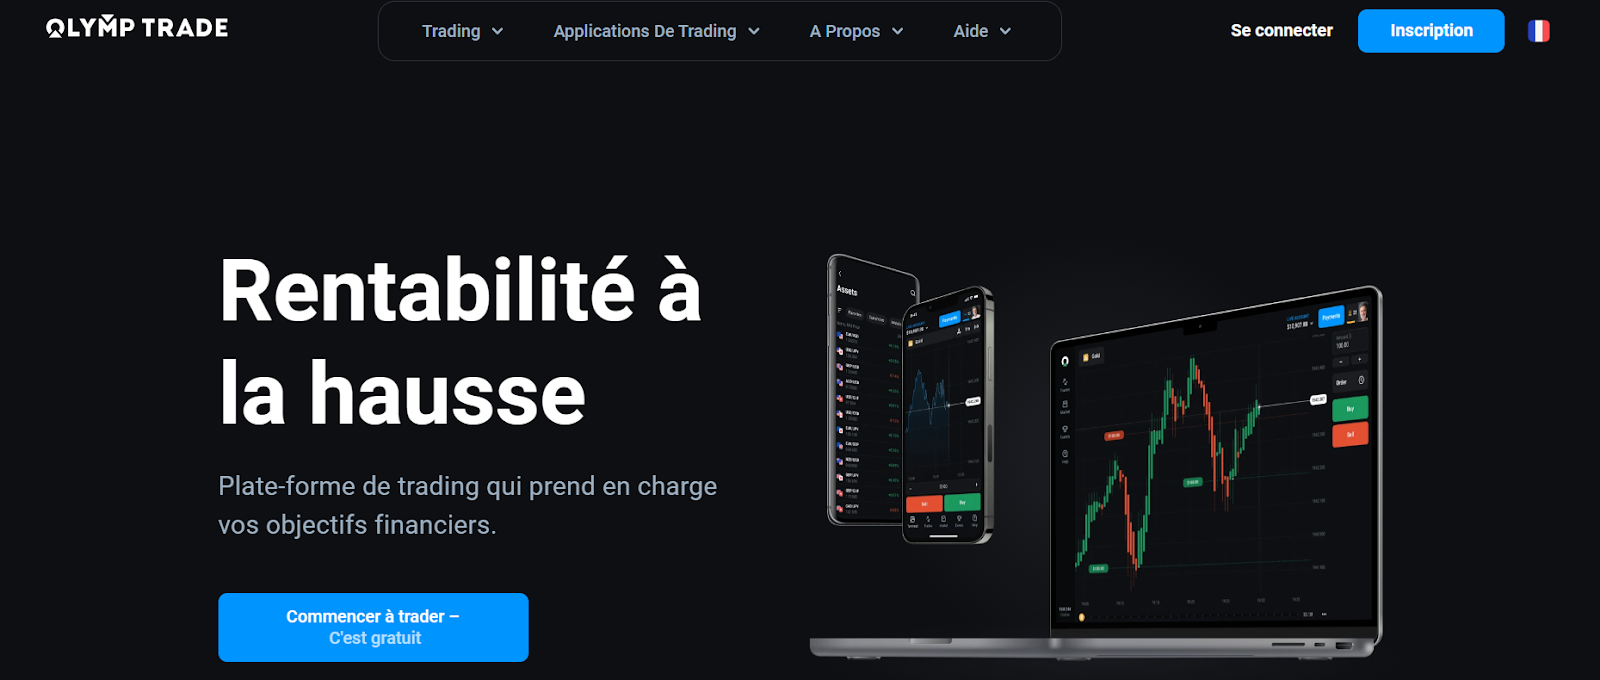 Compte personnel Olymp Trade - Connexion